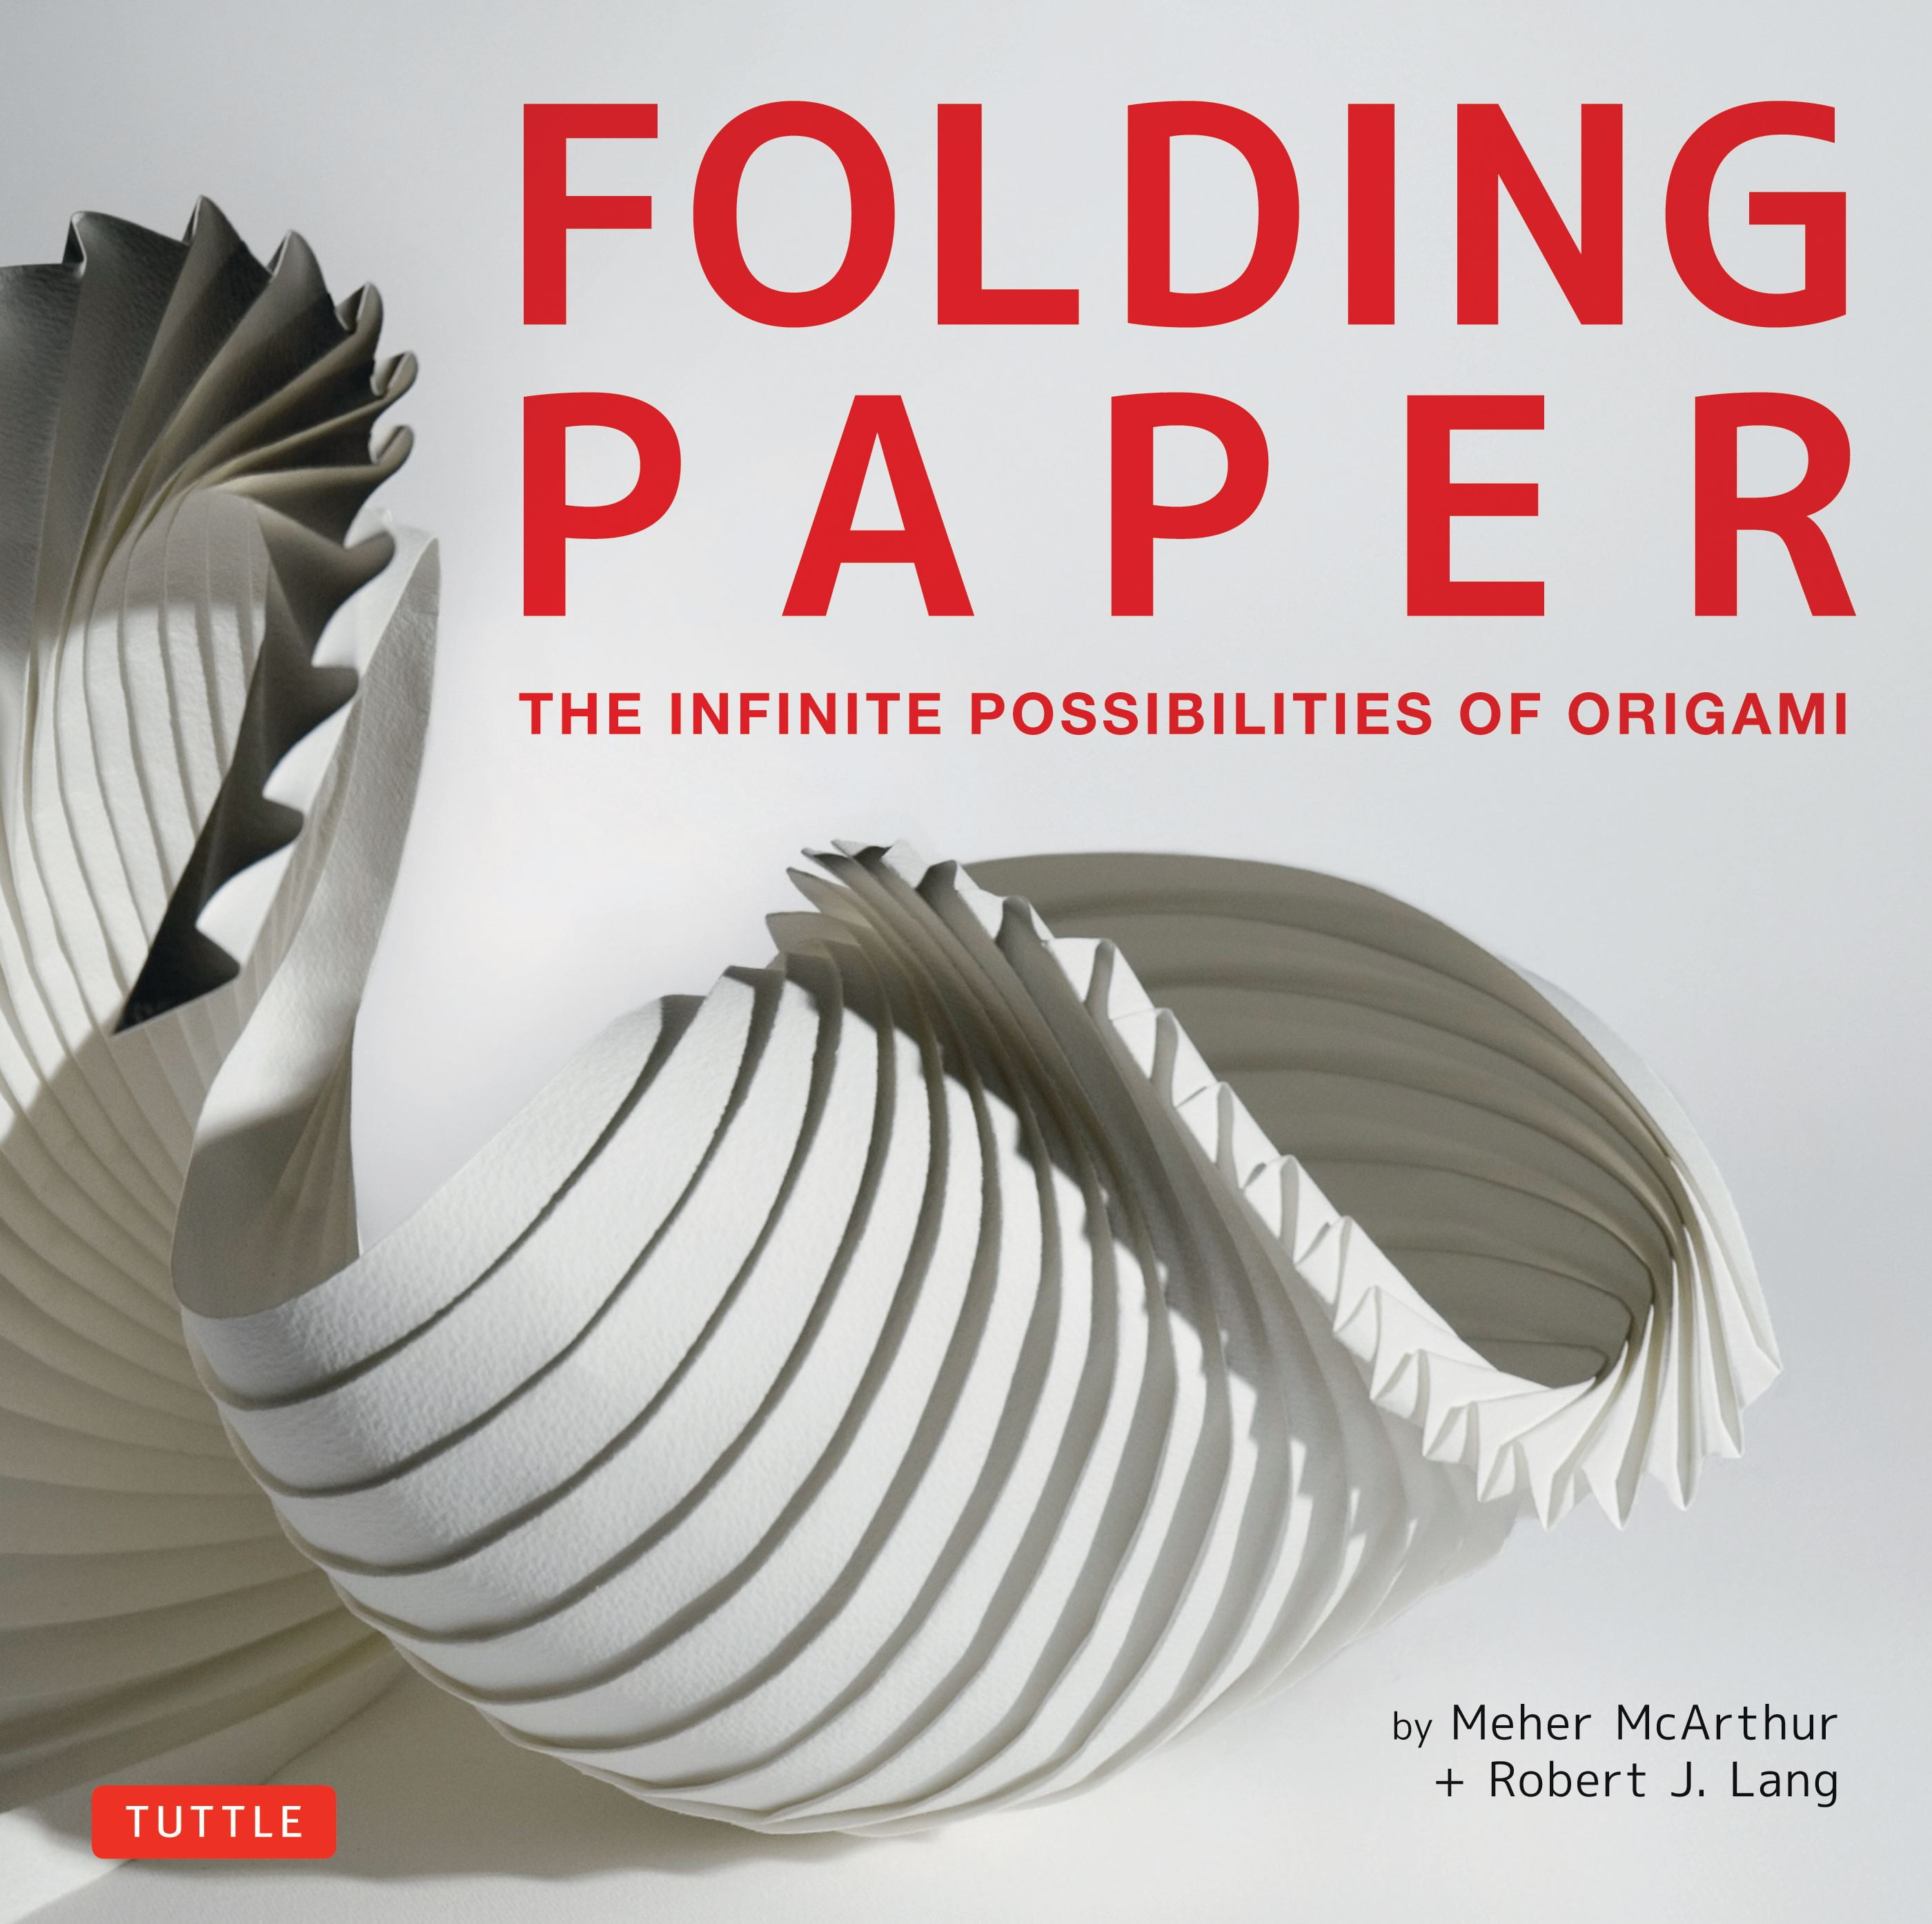 Folding Paper The Infinite Possibilities of Origami Featuring Origami
Art from Some of the Worlds Best Contemporary Papercraft Artists
Epub-Ebook